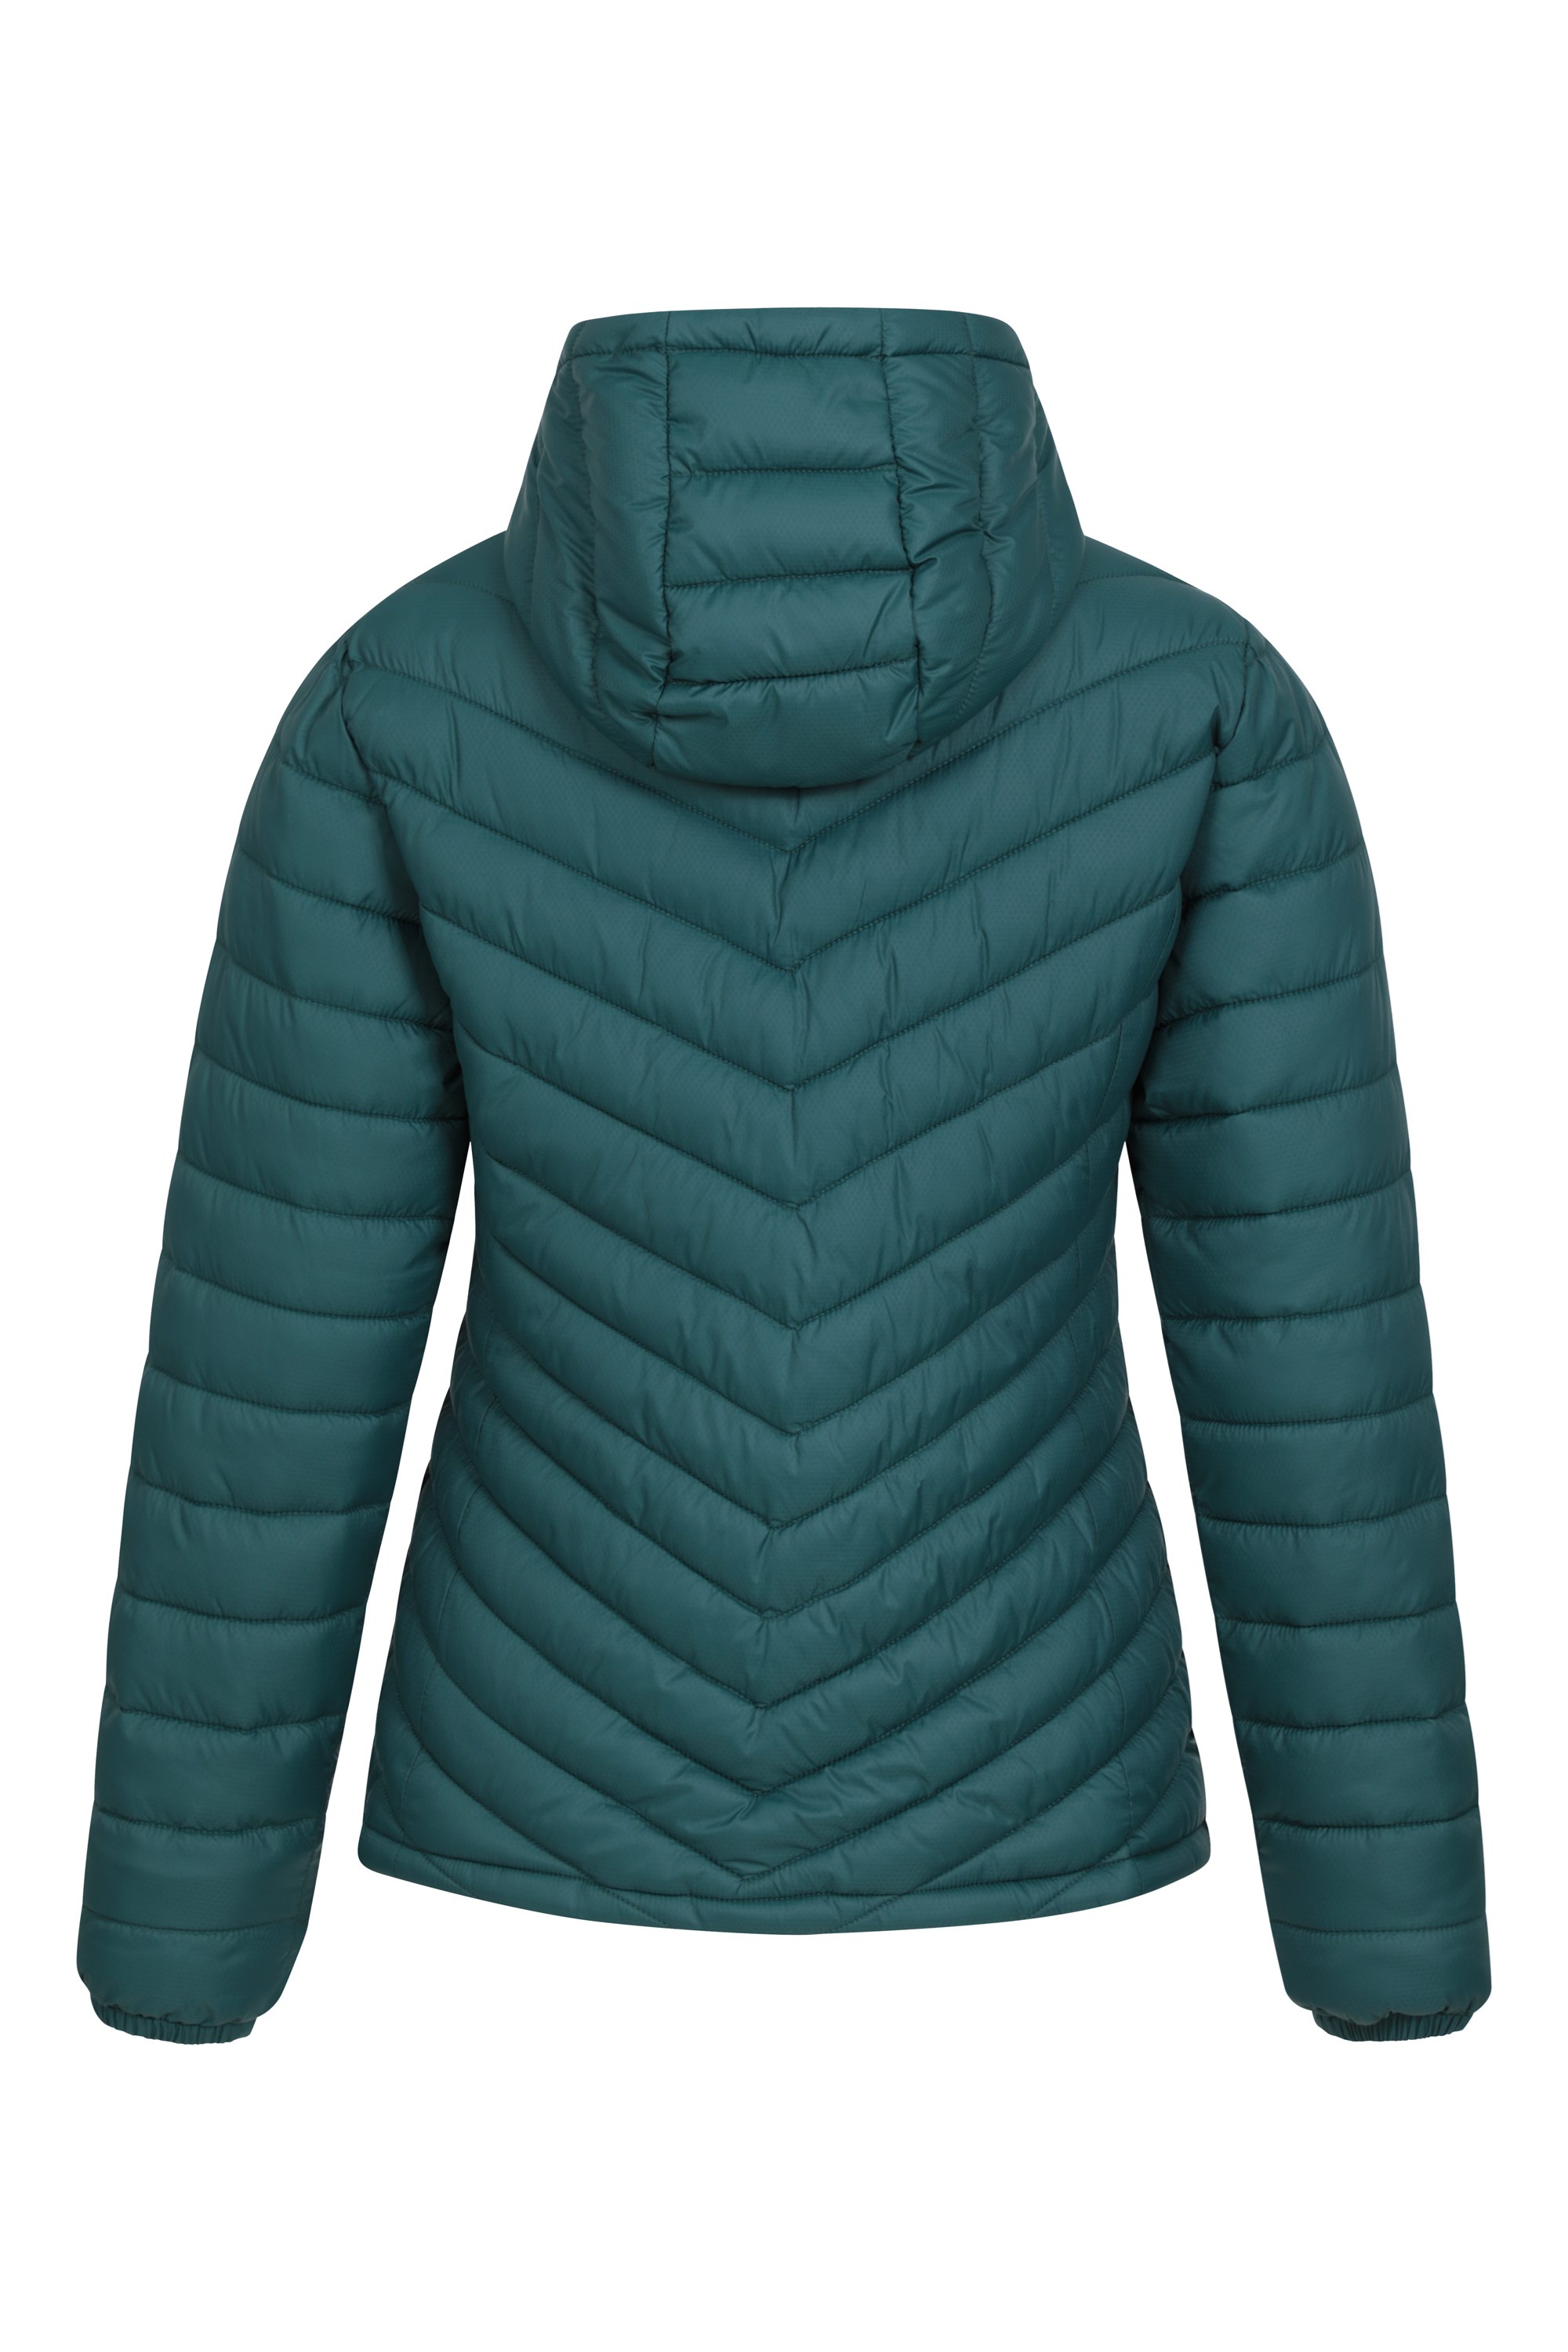 Mountain Warehouse Womens Padded Jacket 100% Polyamide with Microfiber Filler 